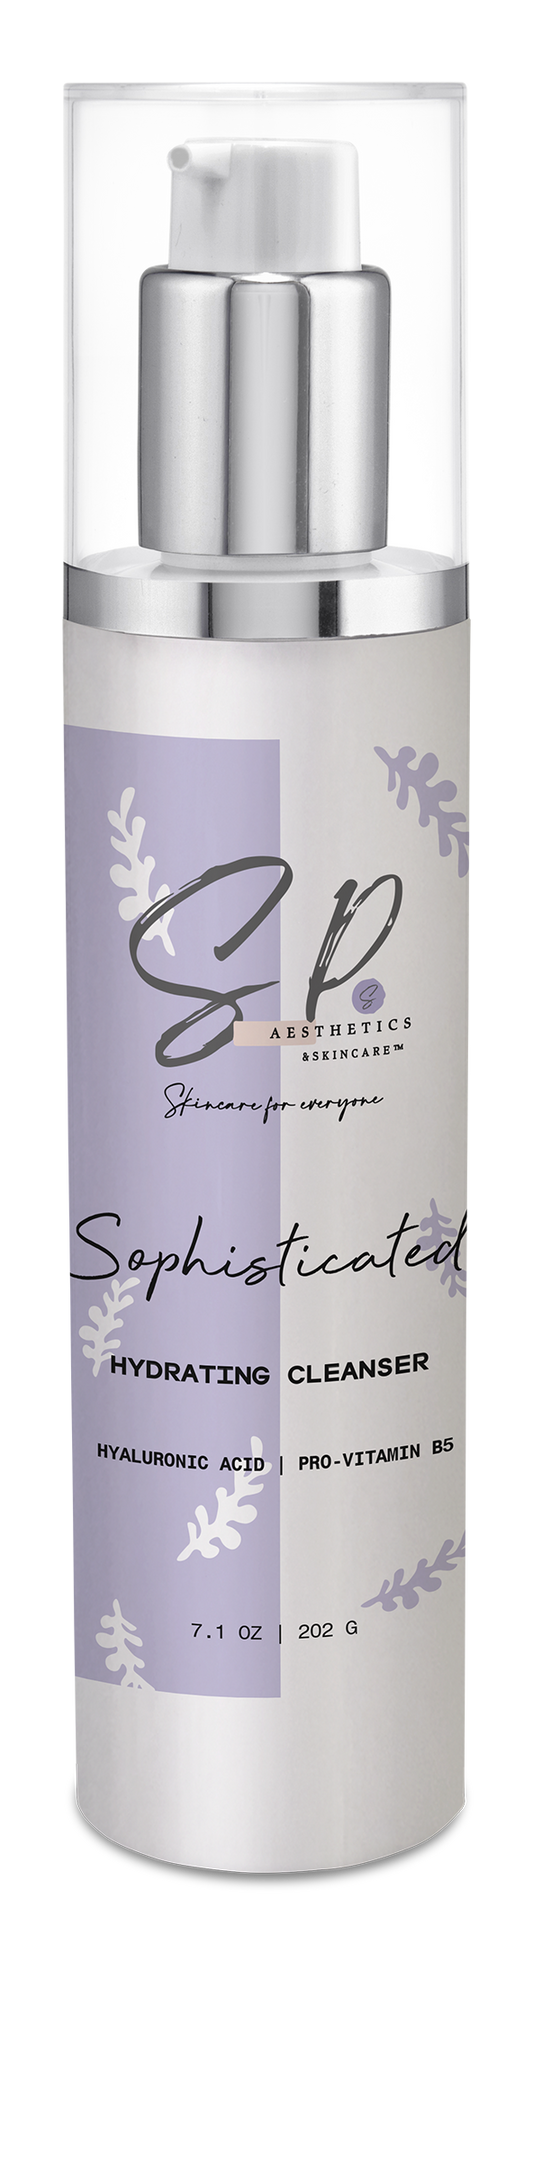 Sophisticated Hydrating Cleanser